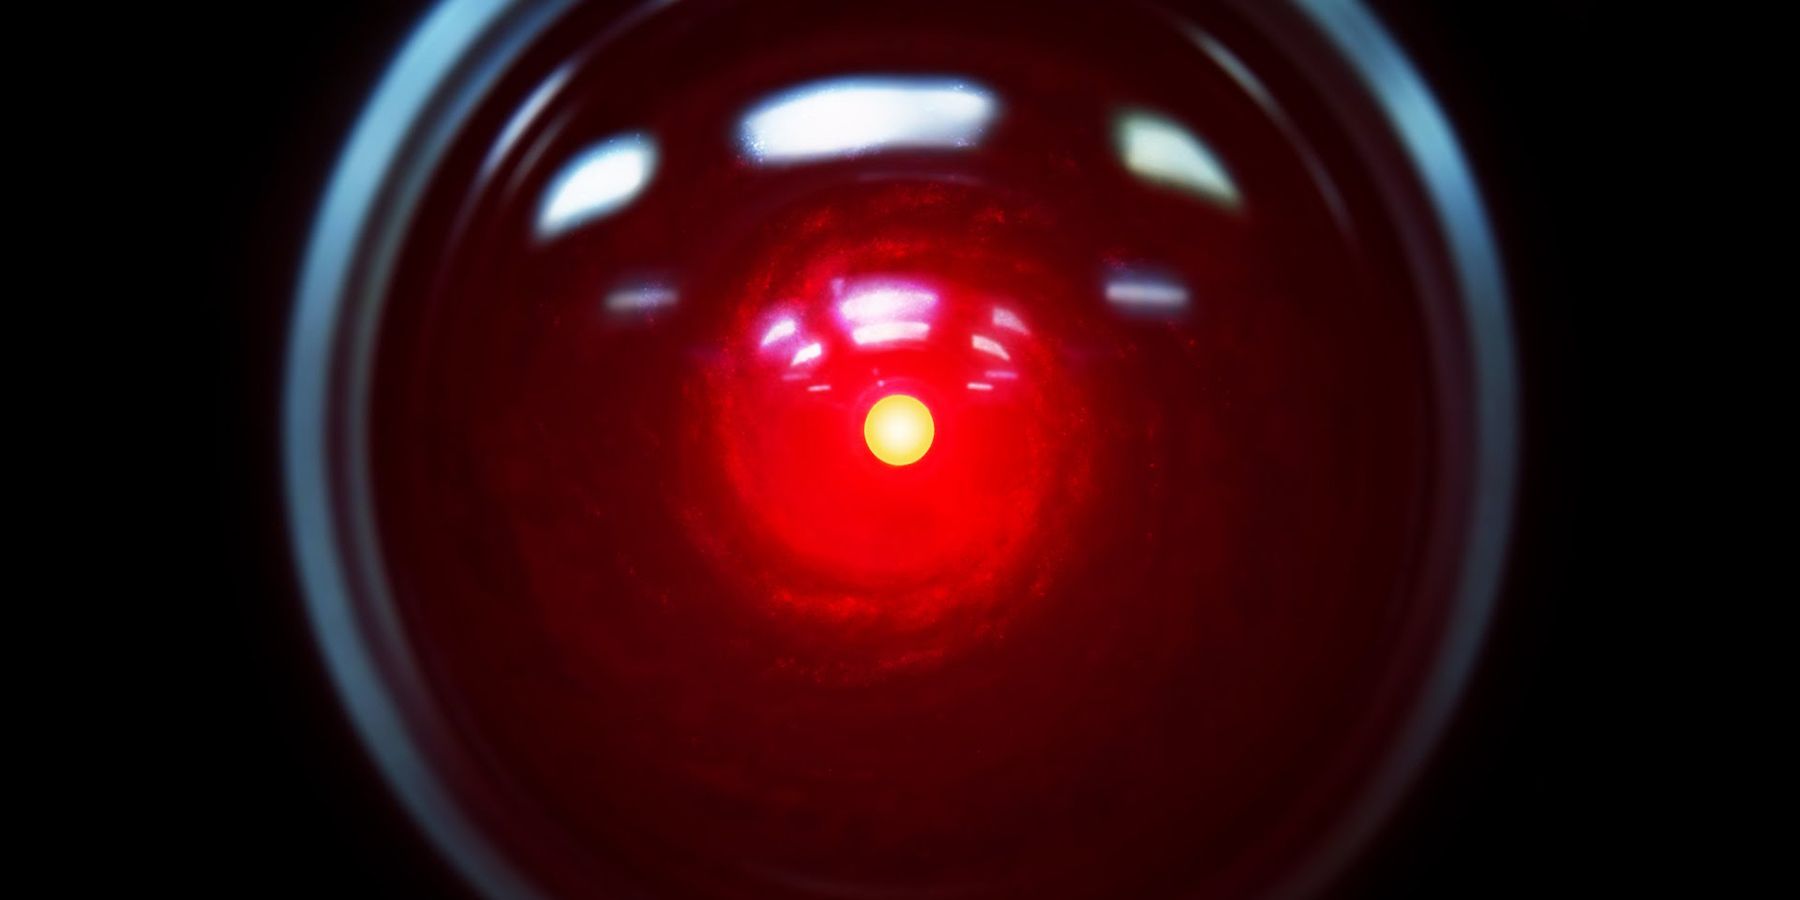 A close up of the Hal 9000 